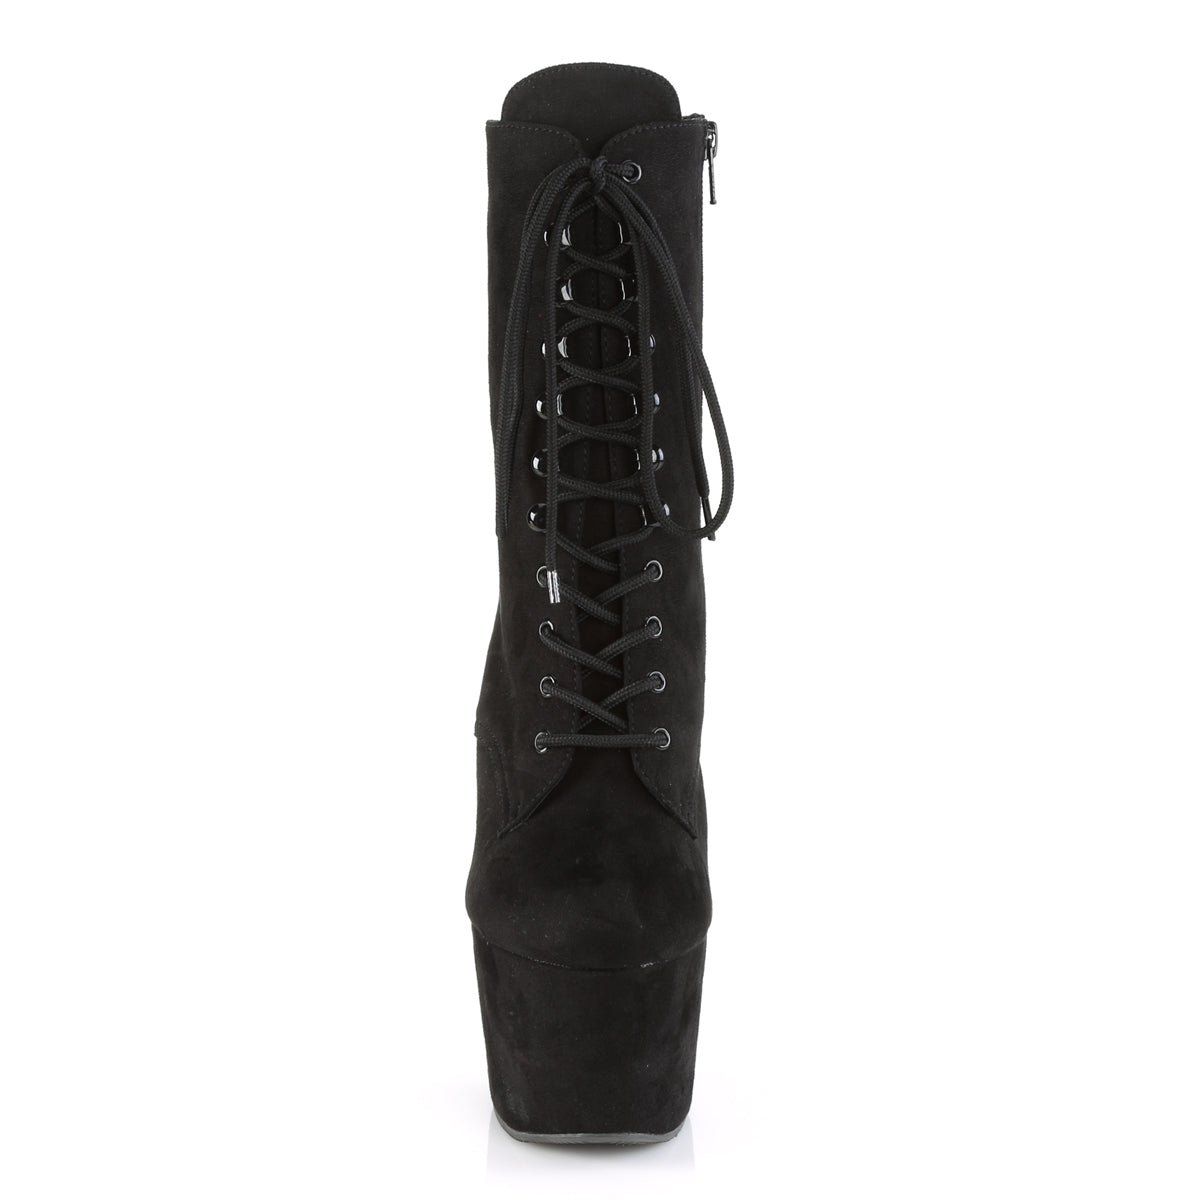 ADORE-1020FS Black Suede Lace Up Ankle Boots